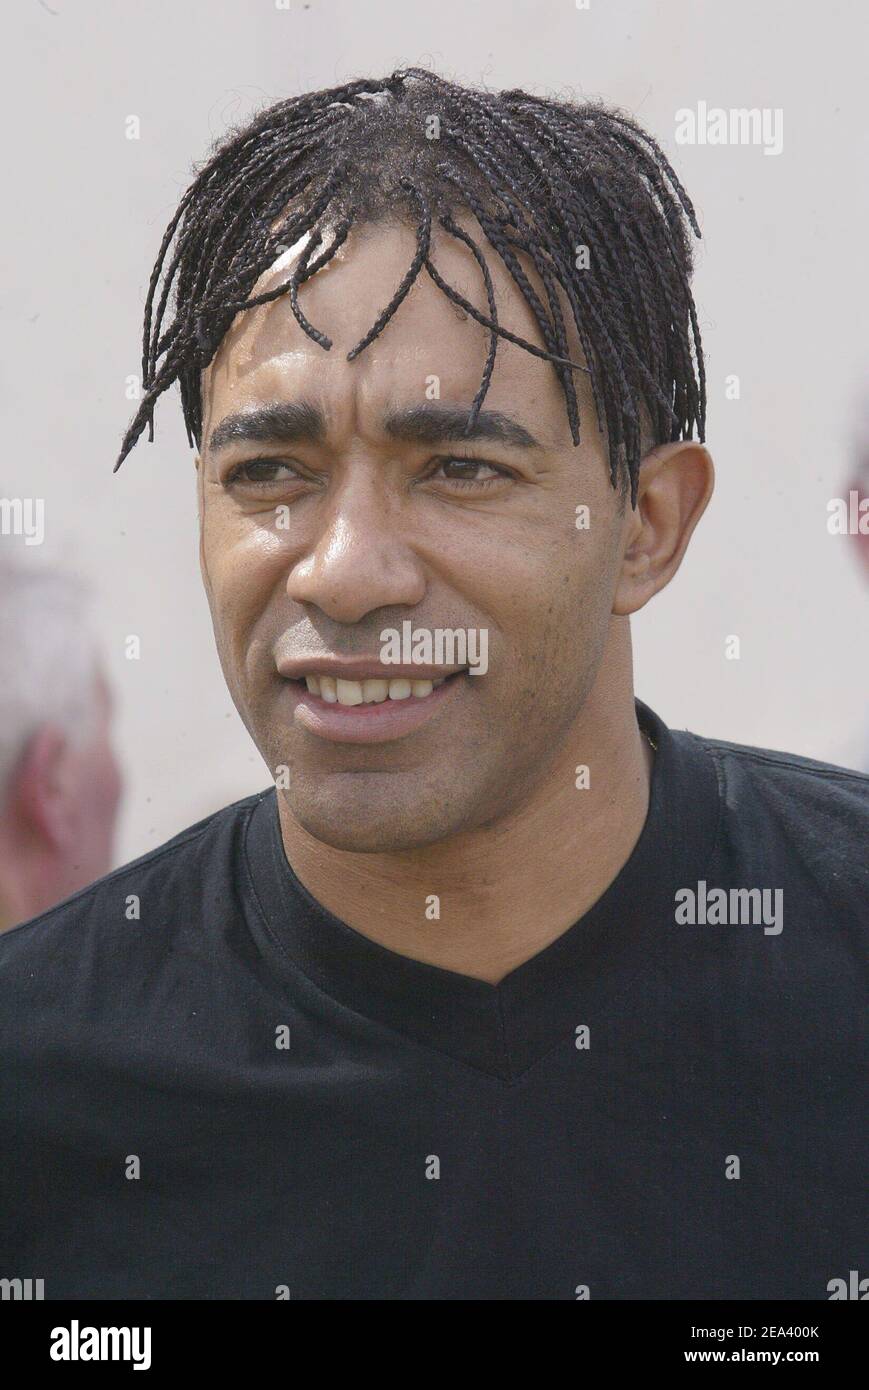 Former French soccer player Francis Loko participates in a soccer match between former French International players and former PSG players in honor of the late PSG player Jean-Pierre Dogliani at the Louis Raffegeau stadium in Le Pecq, near Paris, France, on April 30, 2005. Photo by Mehdi Taamallah/ABACA. Stock Photo